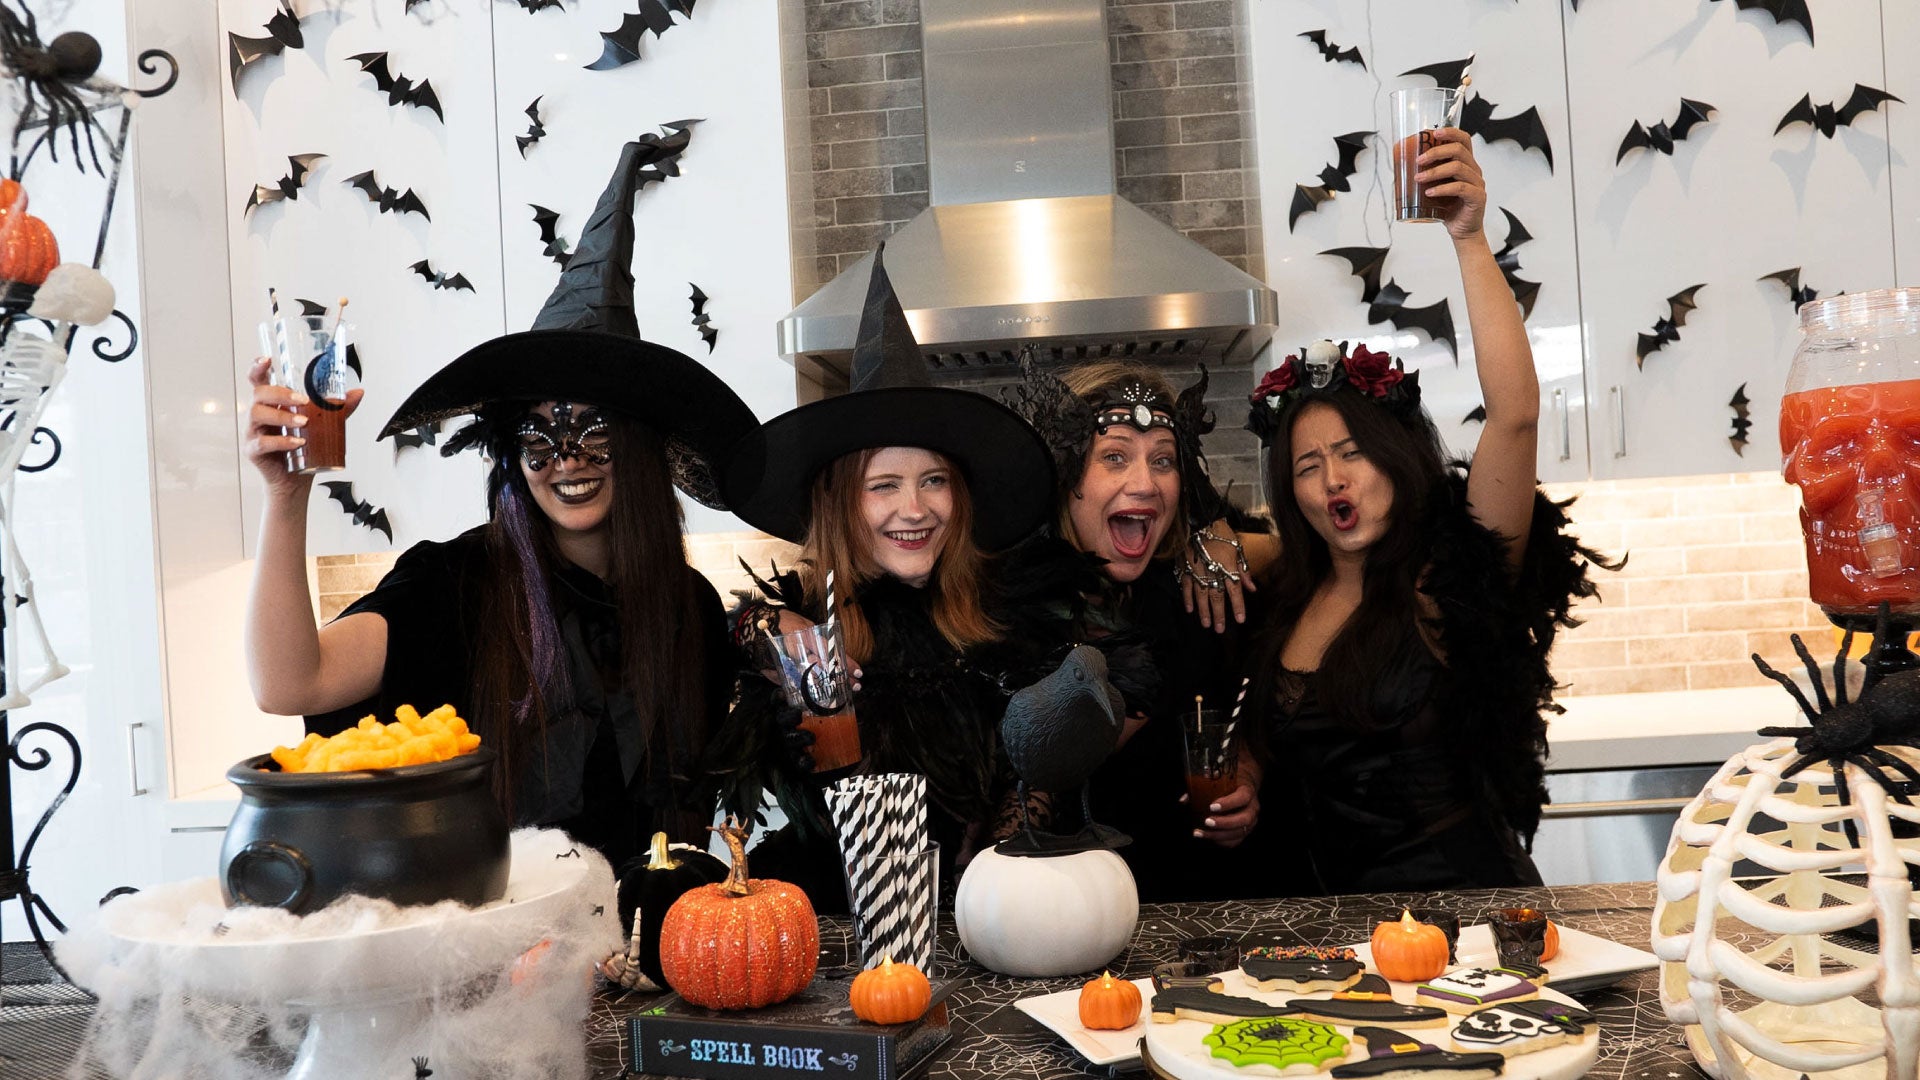 How to dress up for a Halloween party? – Party Expert